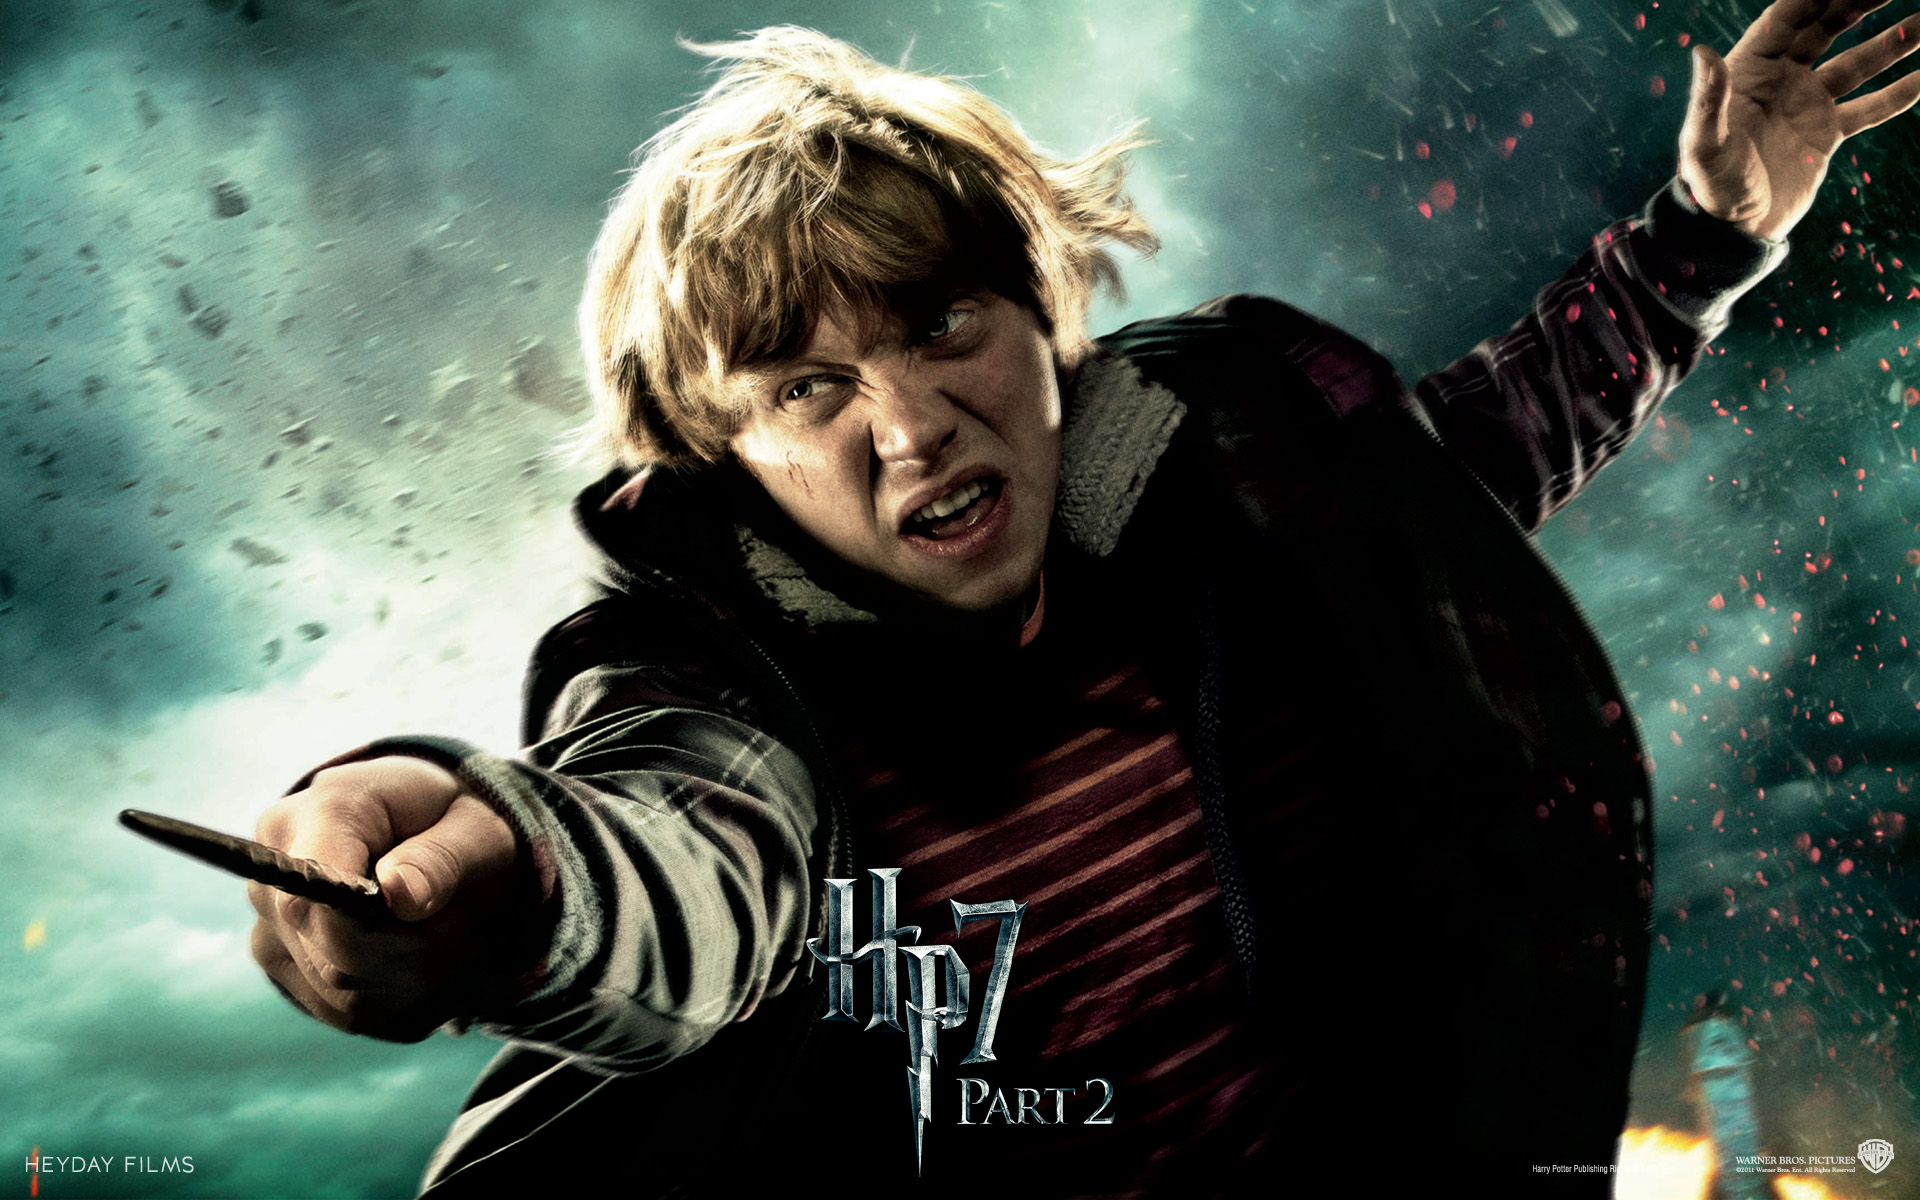 Ron-Weasley-HP7-p2-the-guys-of-harry-potter-24073016-1920-1200